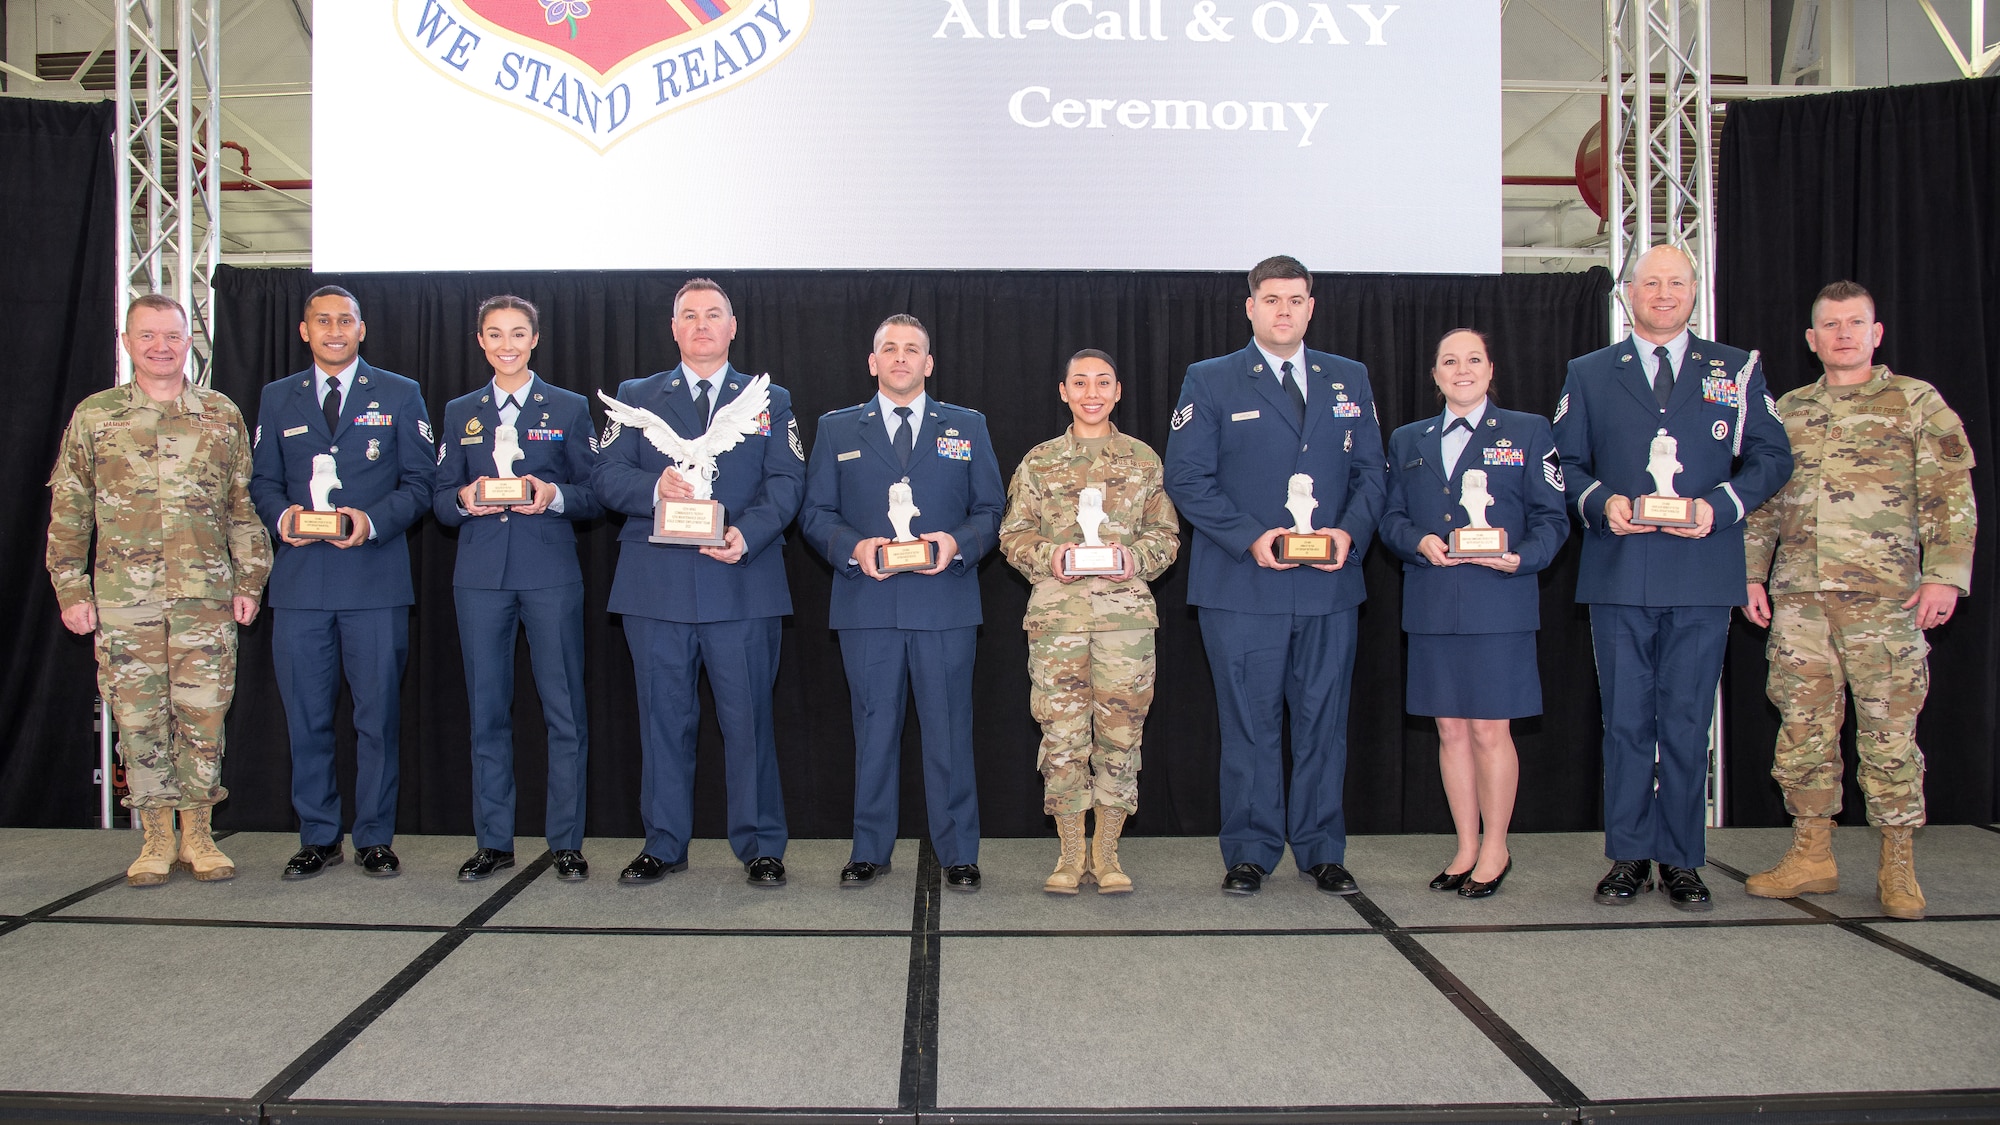 10 uniformed military members stand in a line, middle 8 are holding trophies.